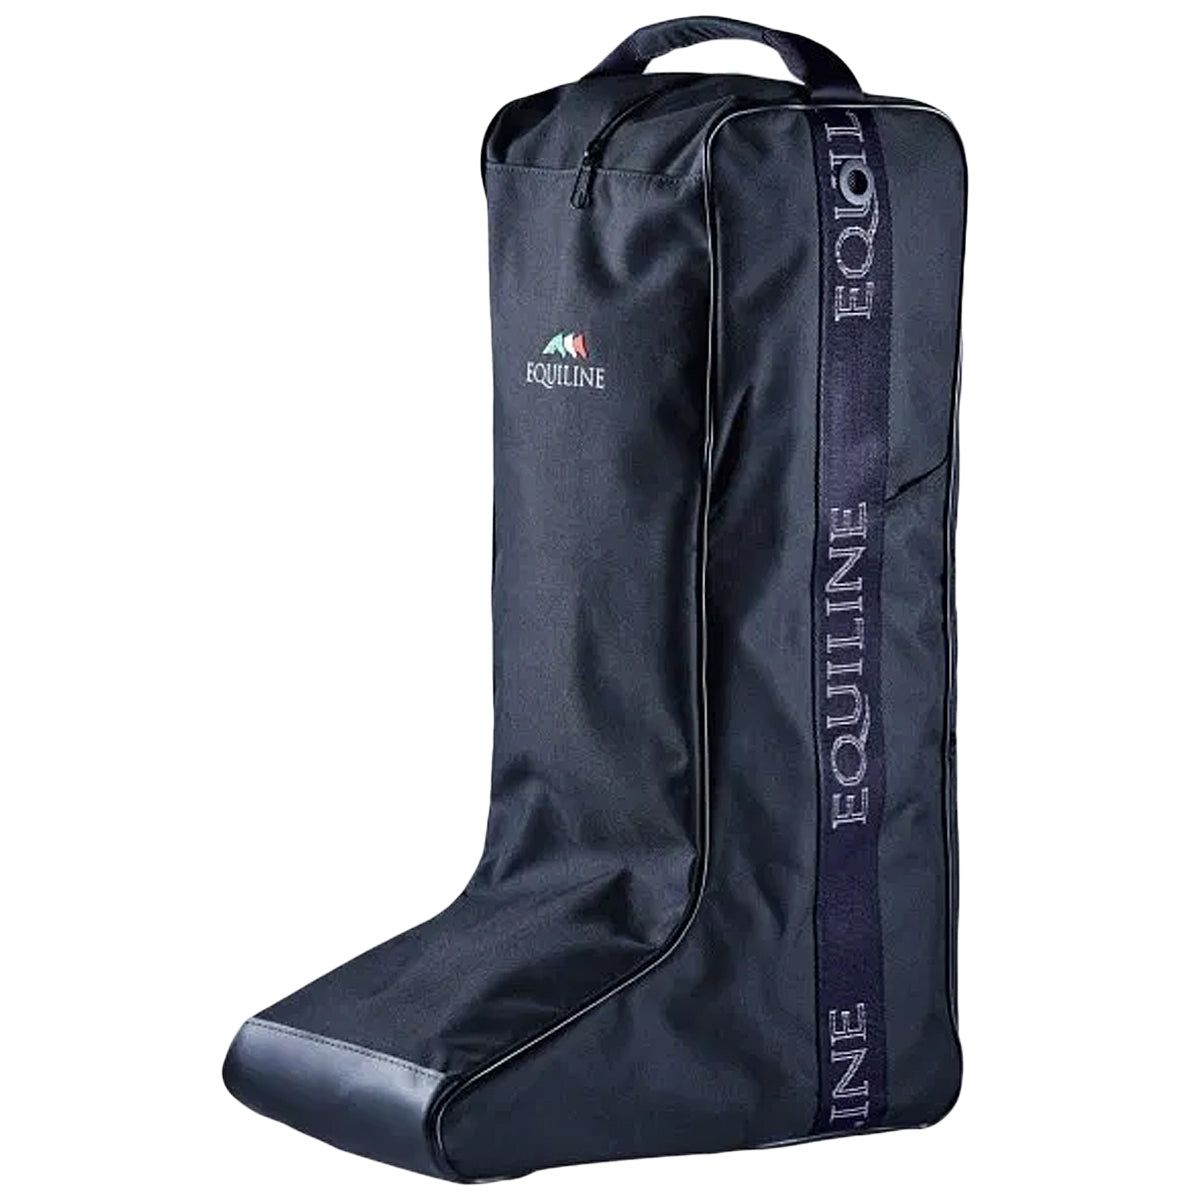 Equiline Boots Bag